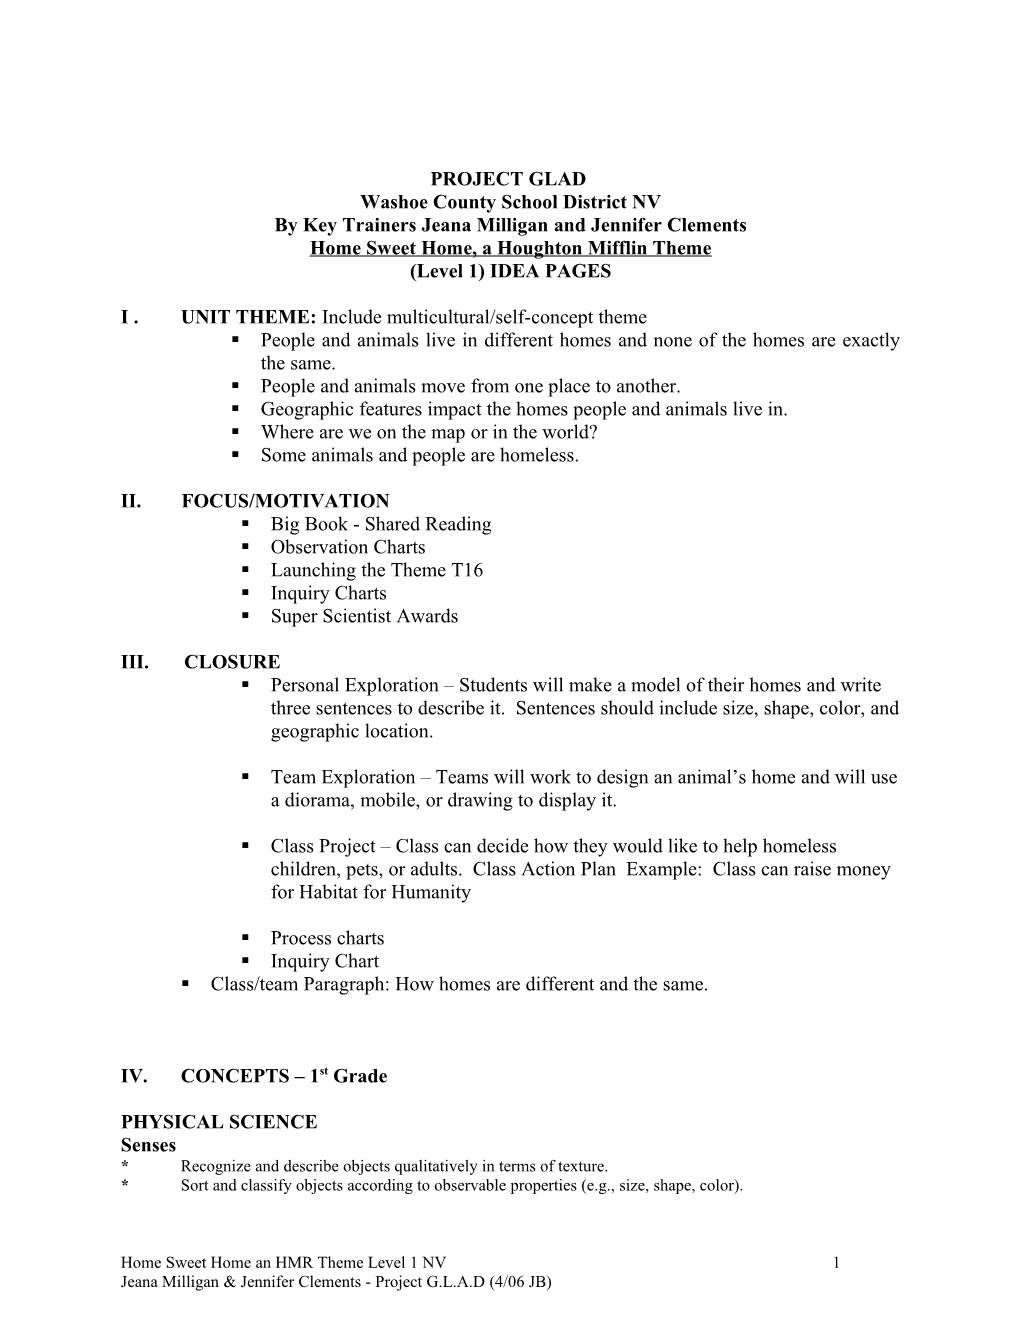 PROJECT GLAD Fountain Valley School District the WOLF THROUGH LITERATURE (Level K) IDEA PAGES